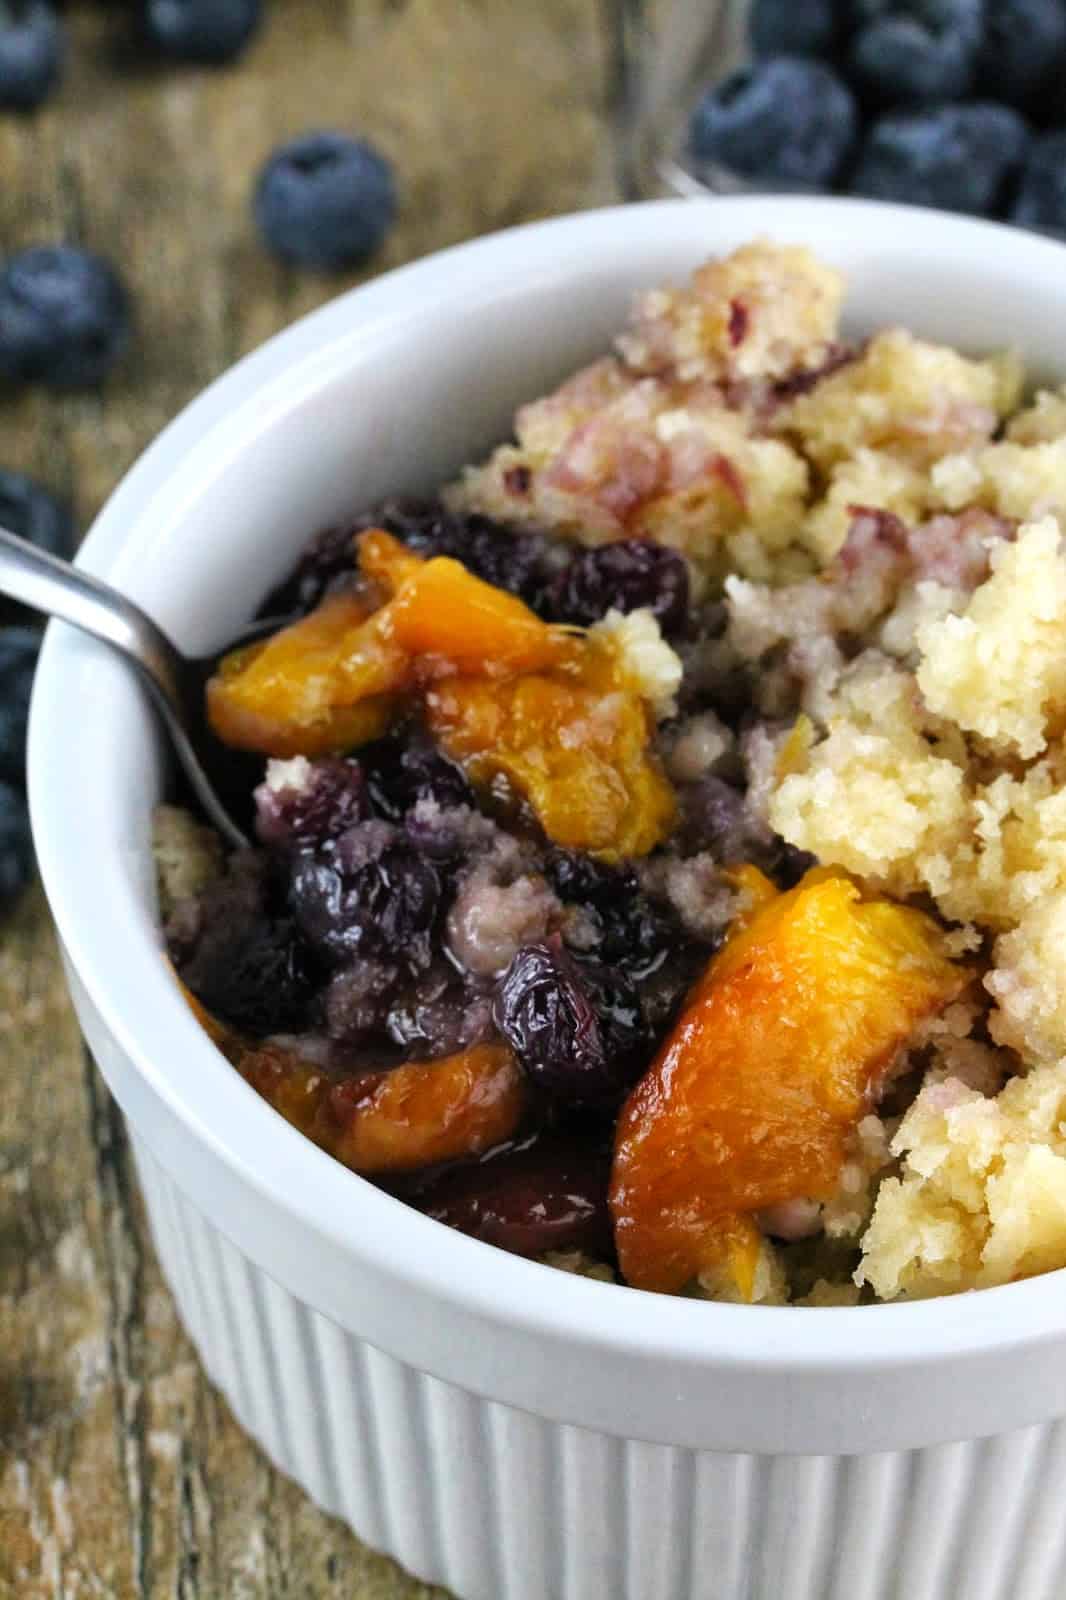 A spoonful of Slow Cooker Blueberry-Nectarine Cobbler is lifted from a bowl. This recipe is a great way to use fresh nectarines and blueberries